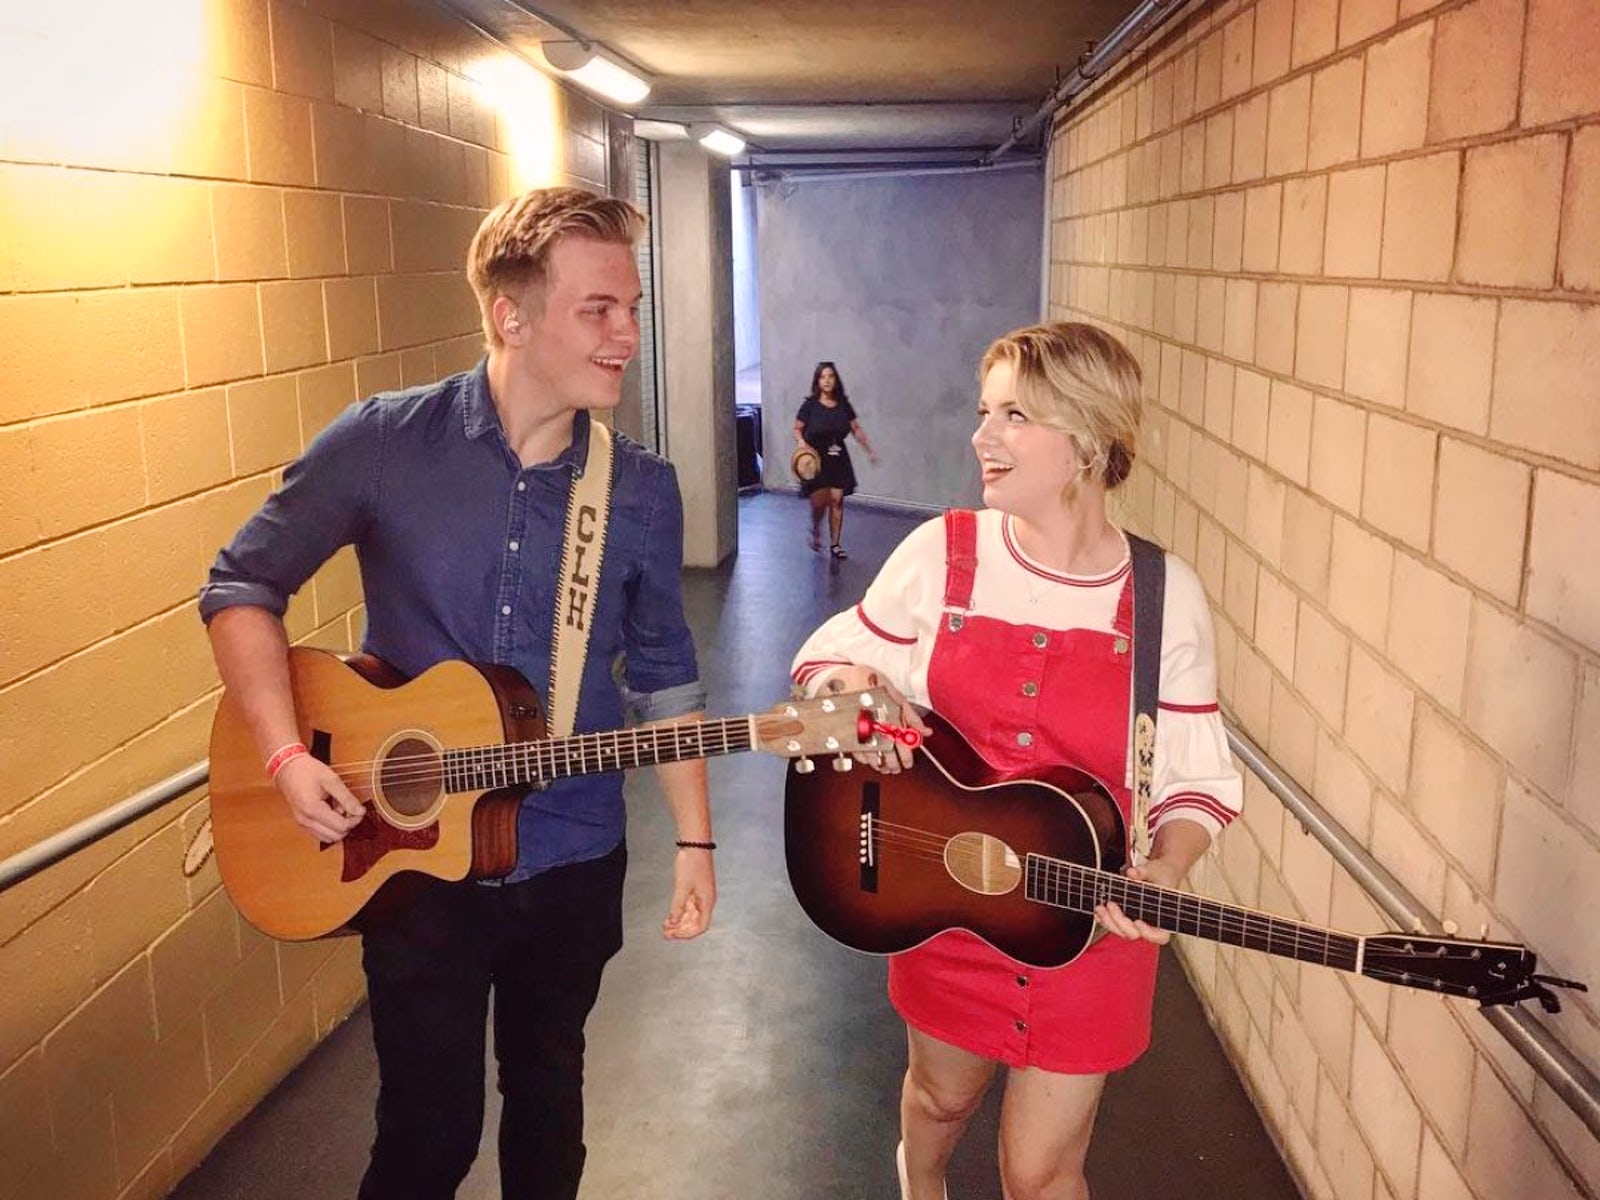 maddie poppe and caleb lee hutchinson